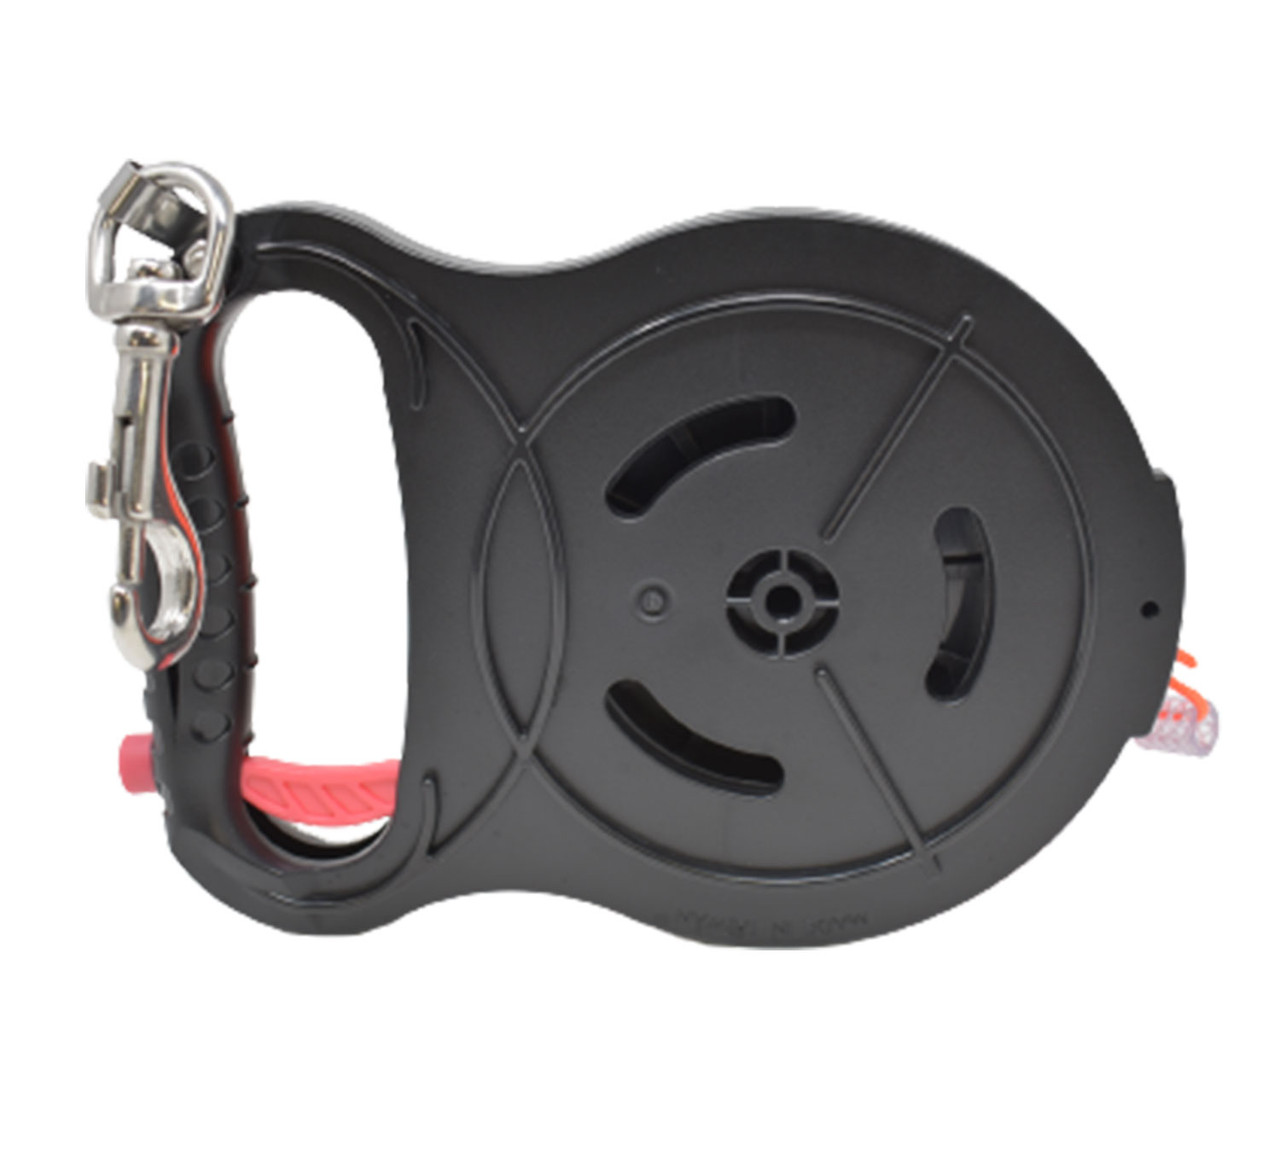 Scuba Choice Heavy Duty Dive Reel for Wreck Diving and Cave Diving, 150m